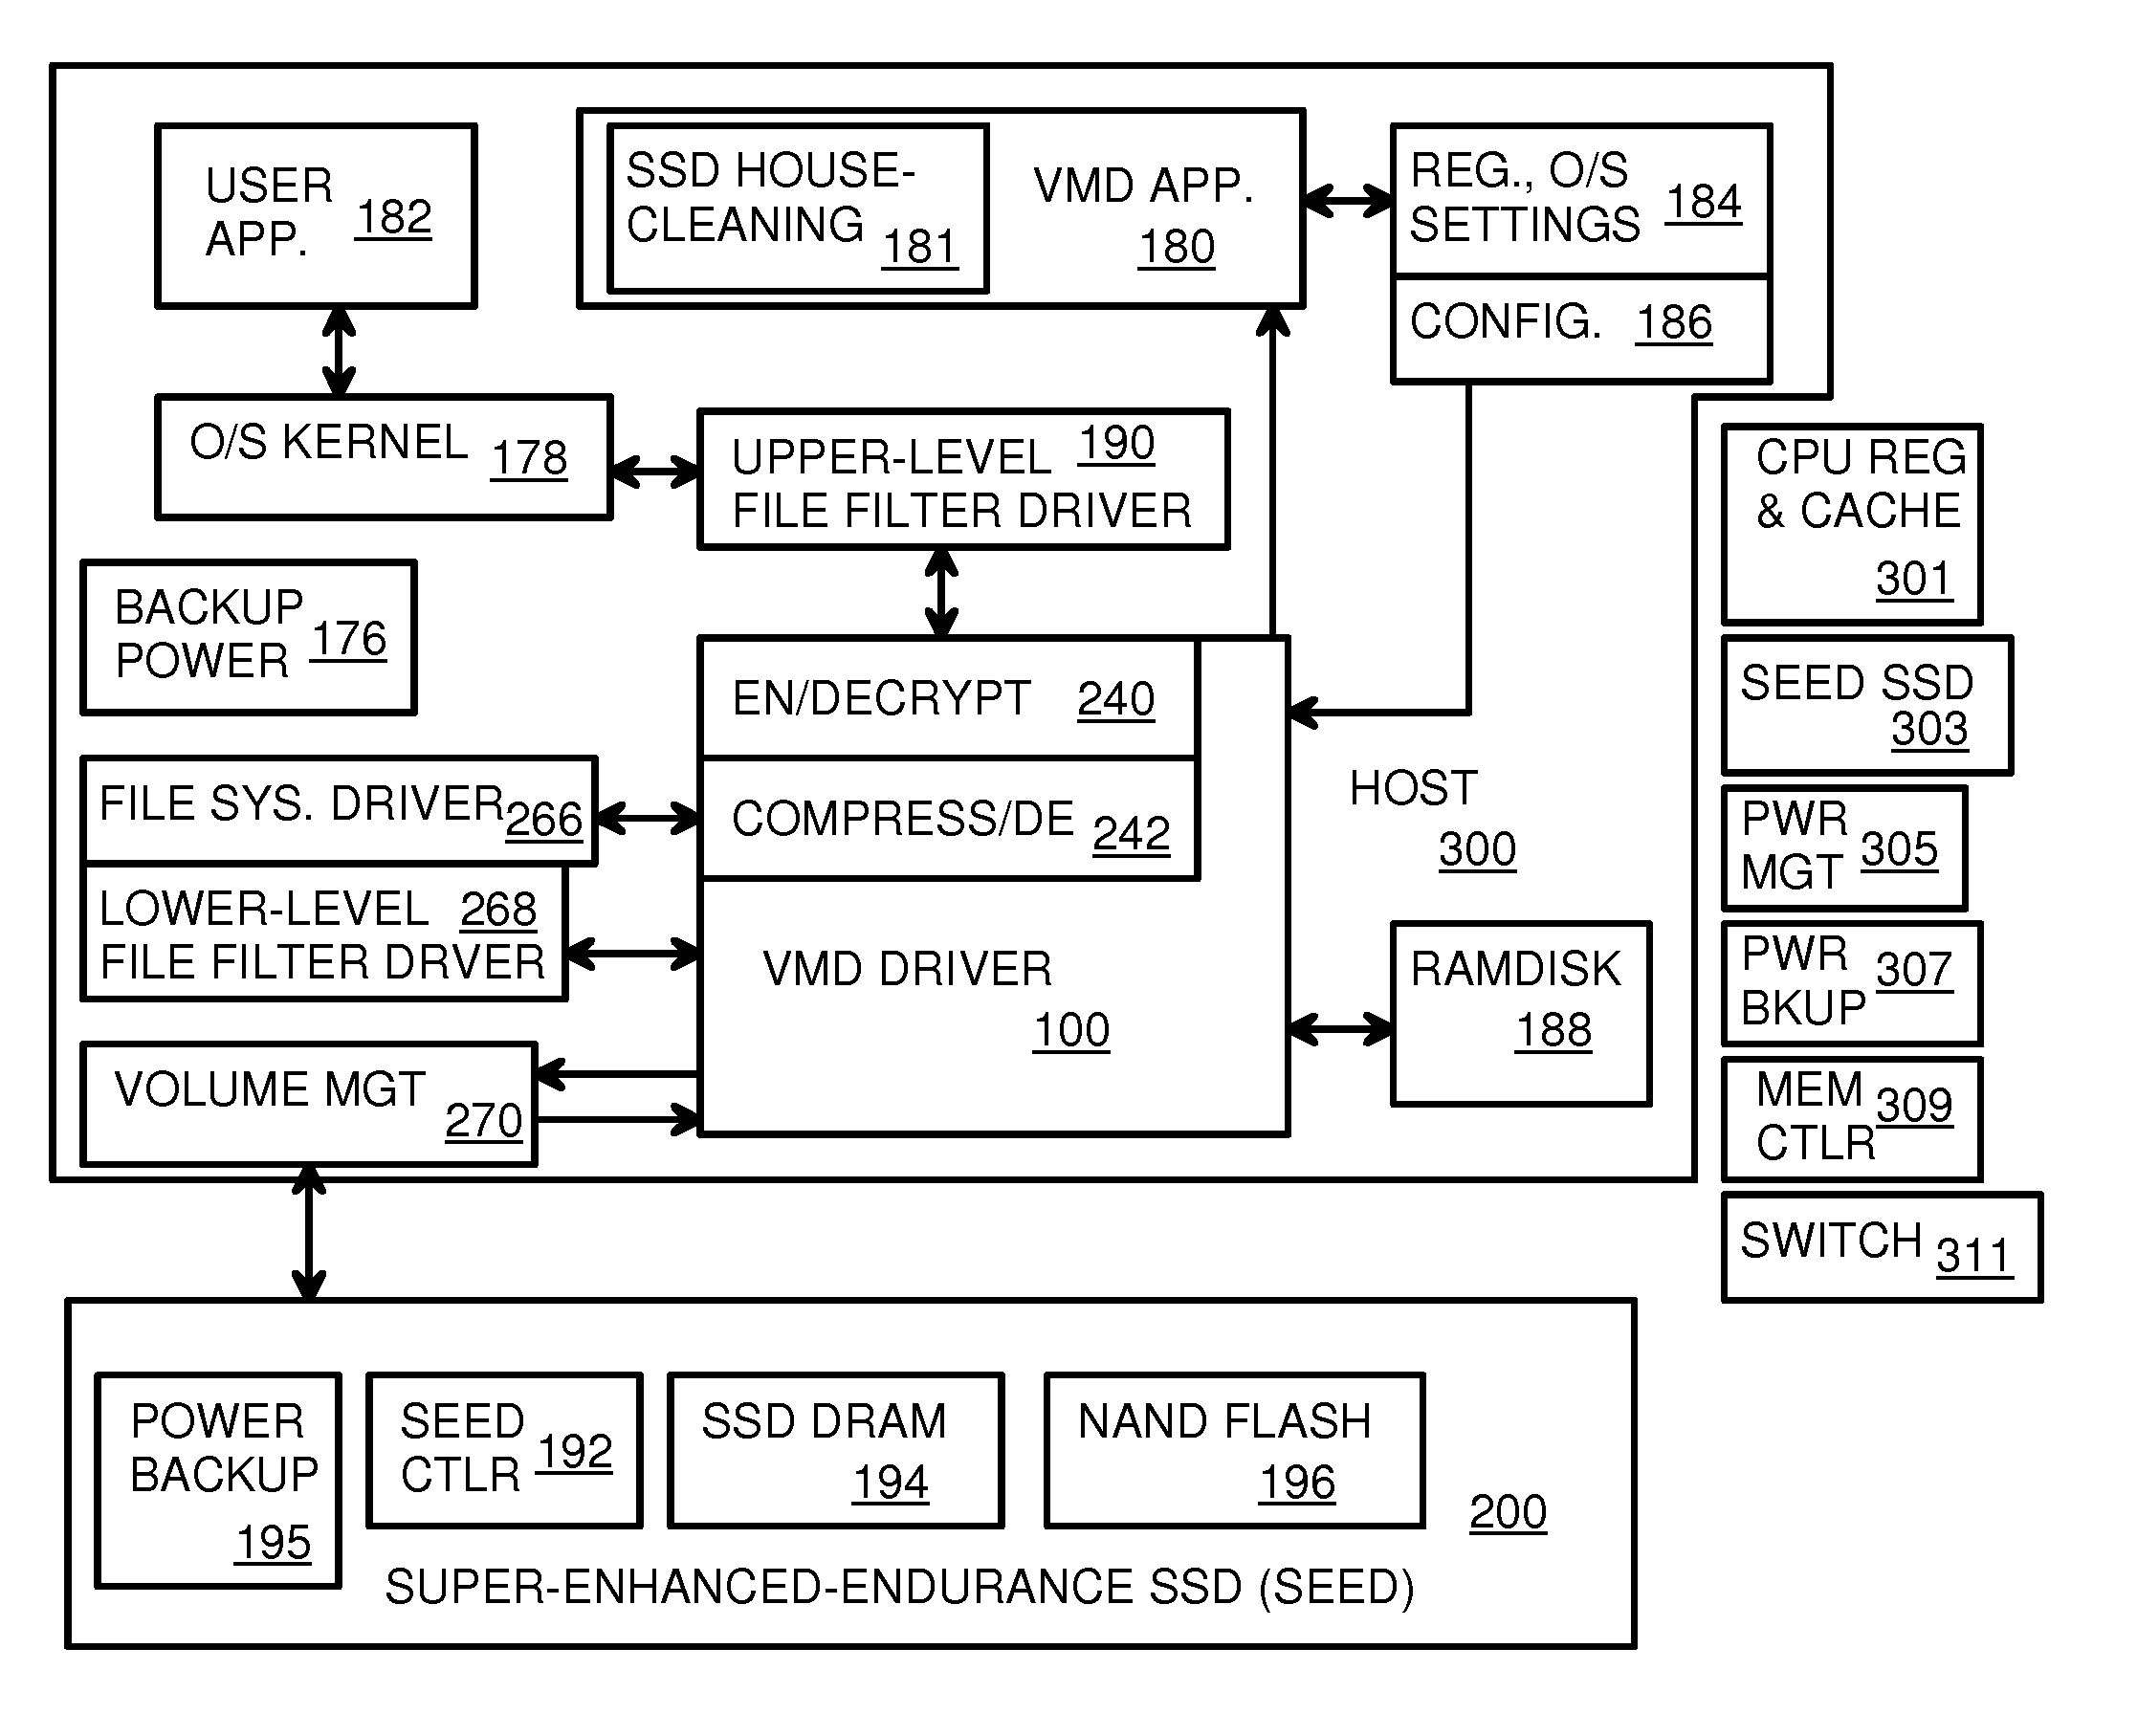 Virtual Memory Device (VMD) Application/Driver with Dual-Level Interception for Data-Type Splitting, Meta-Page Grouping, and Diversion of Temp Files to Ramdisks for Enhanced Flash Endurance